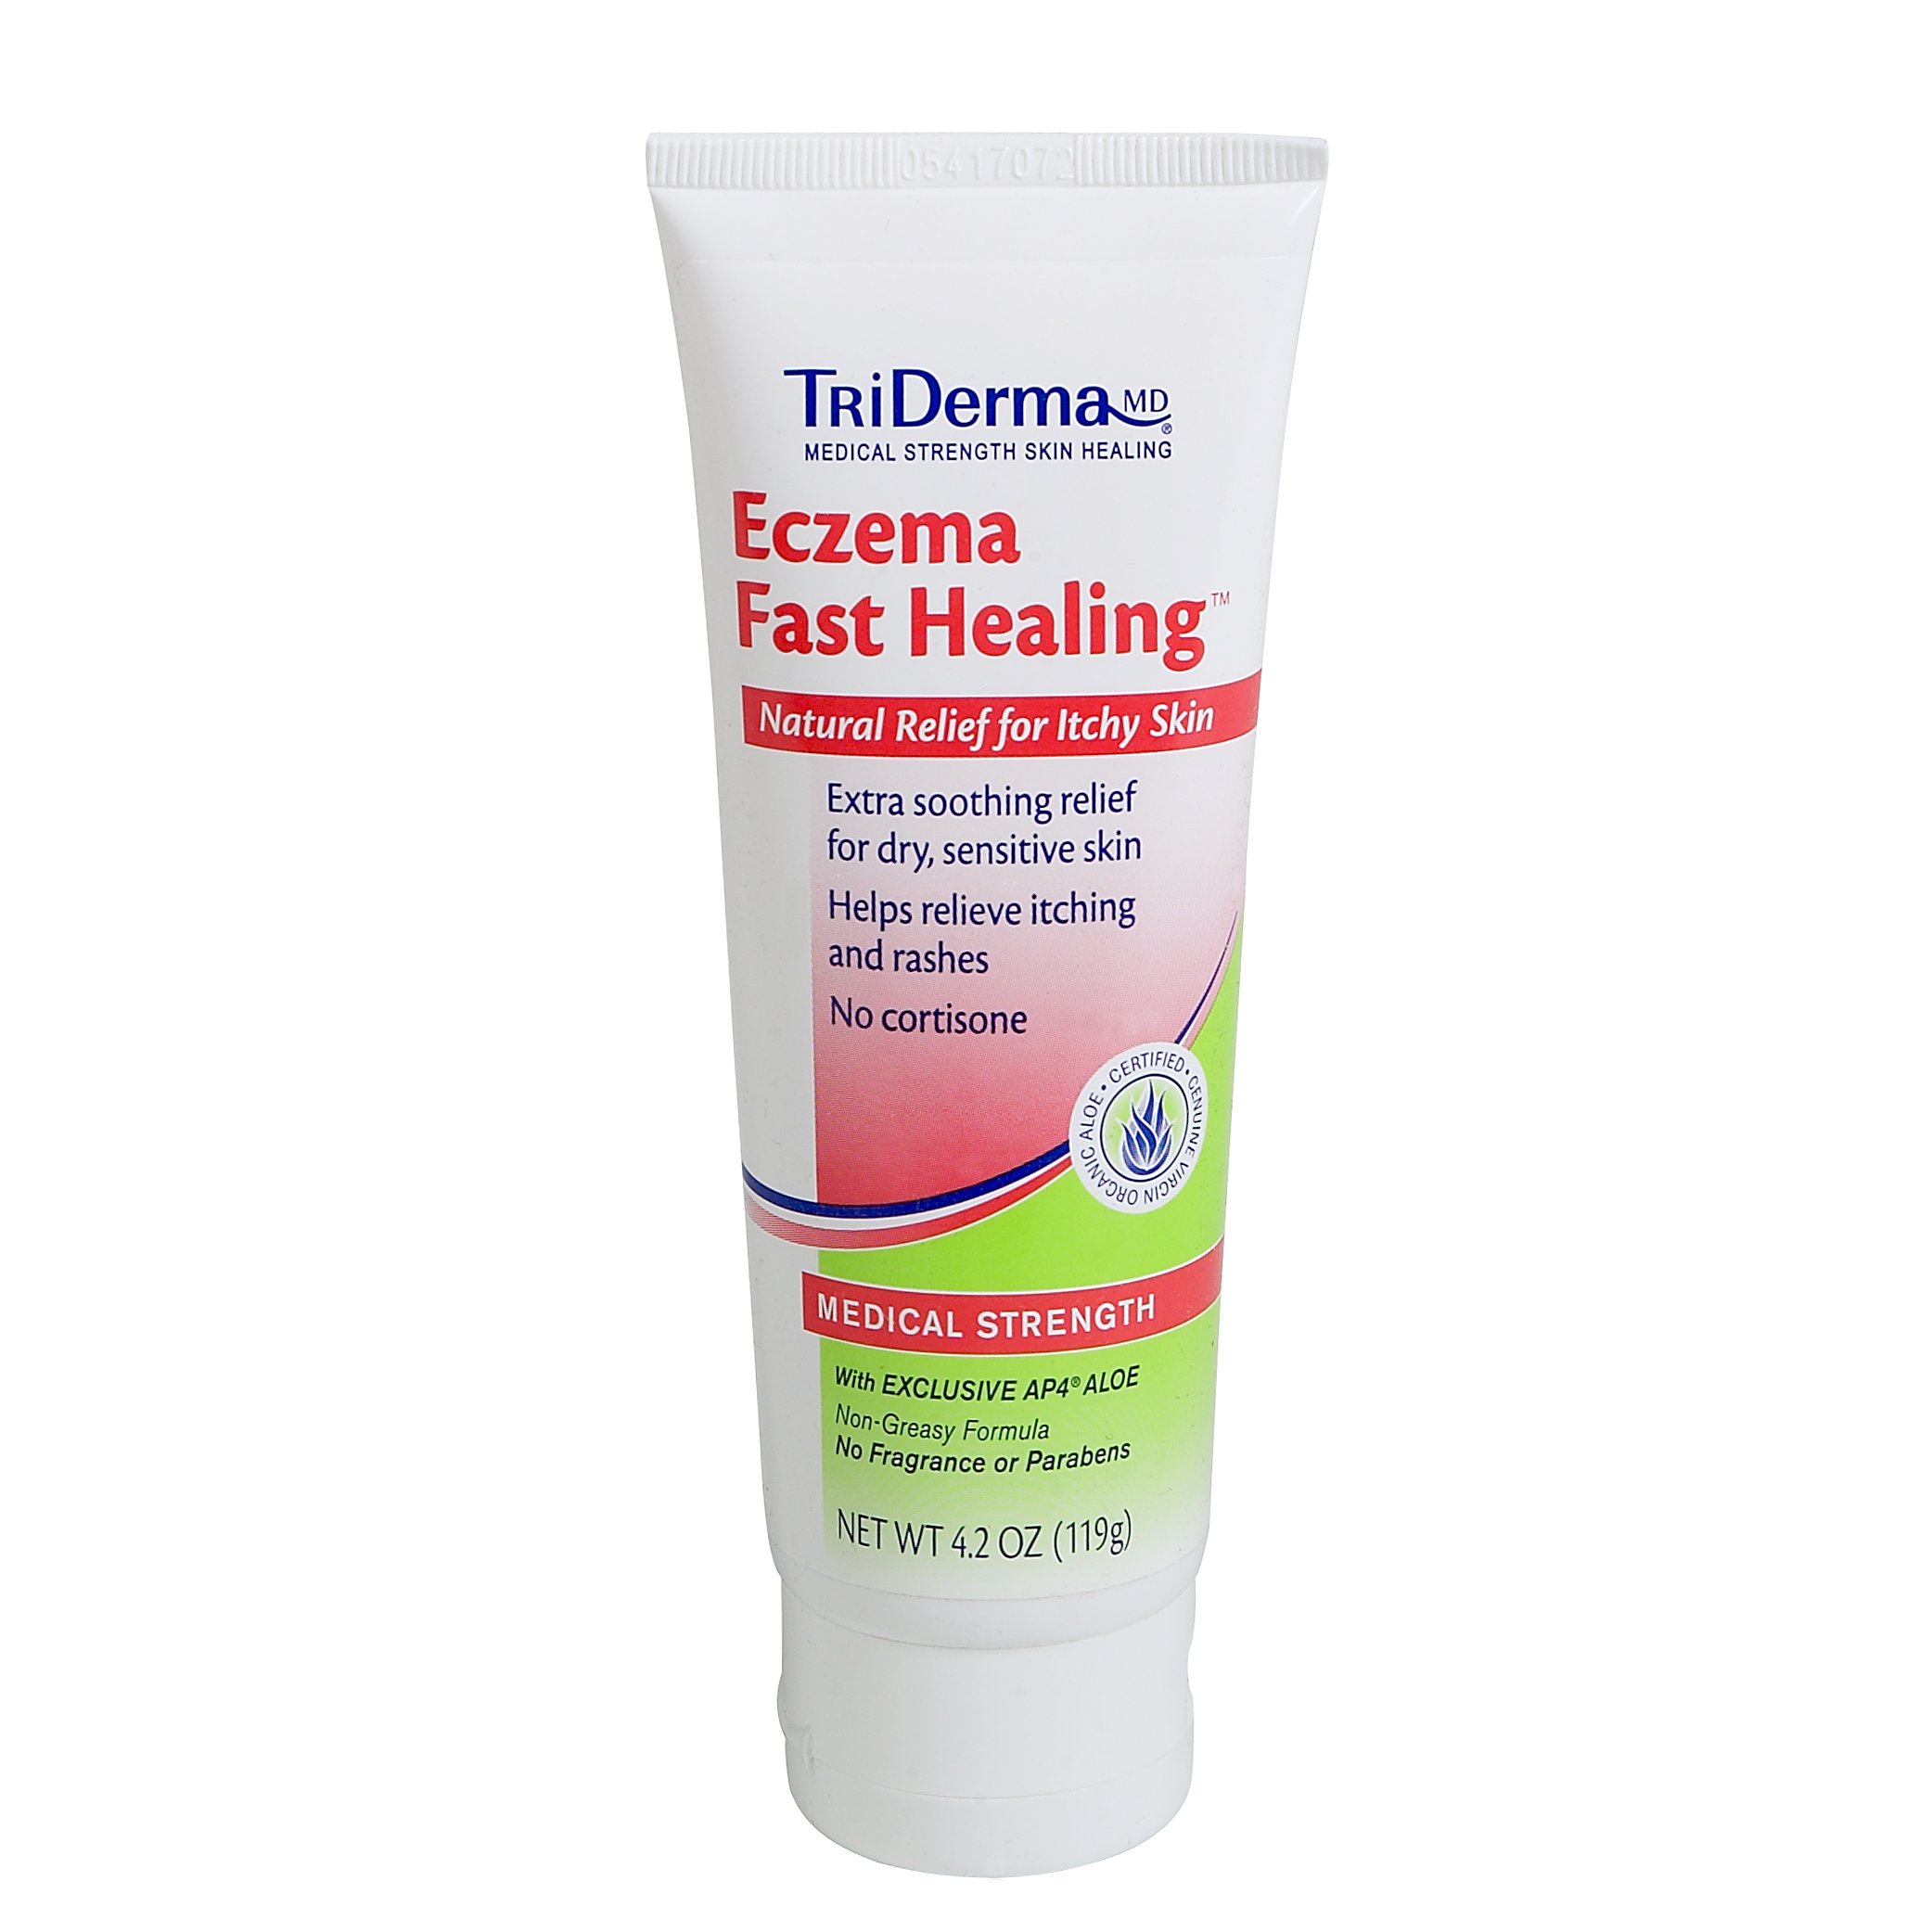 TriDerma Eczema Fast Healing Cream Helps Relieve Cracked Itchy Skin